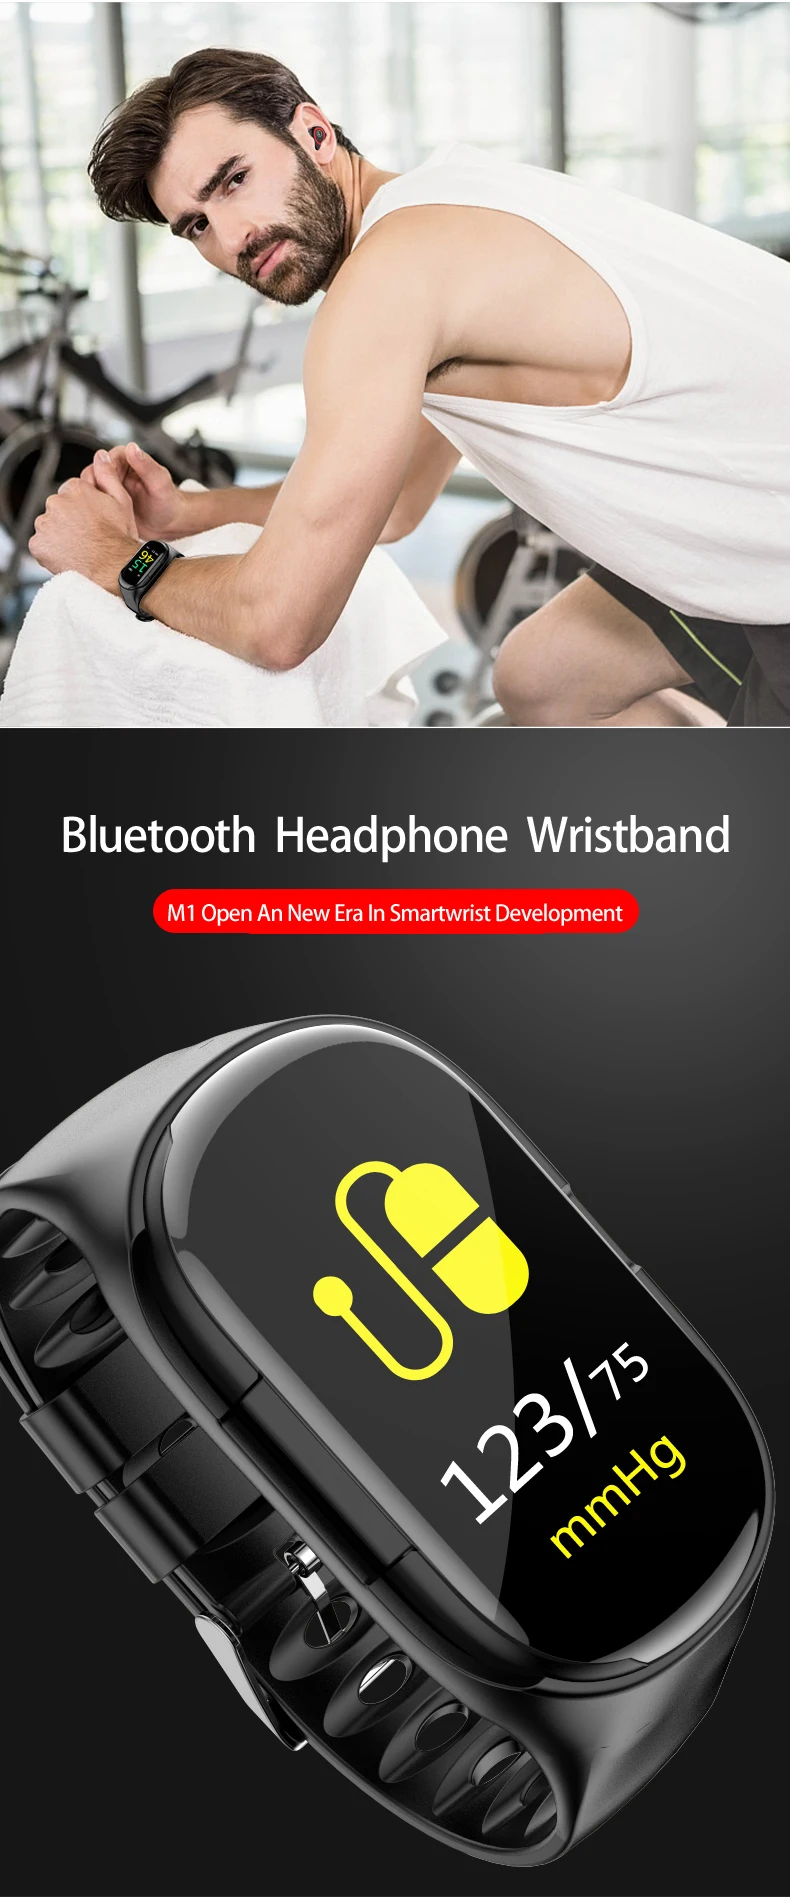 The best smart band